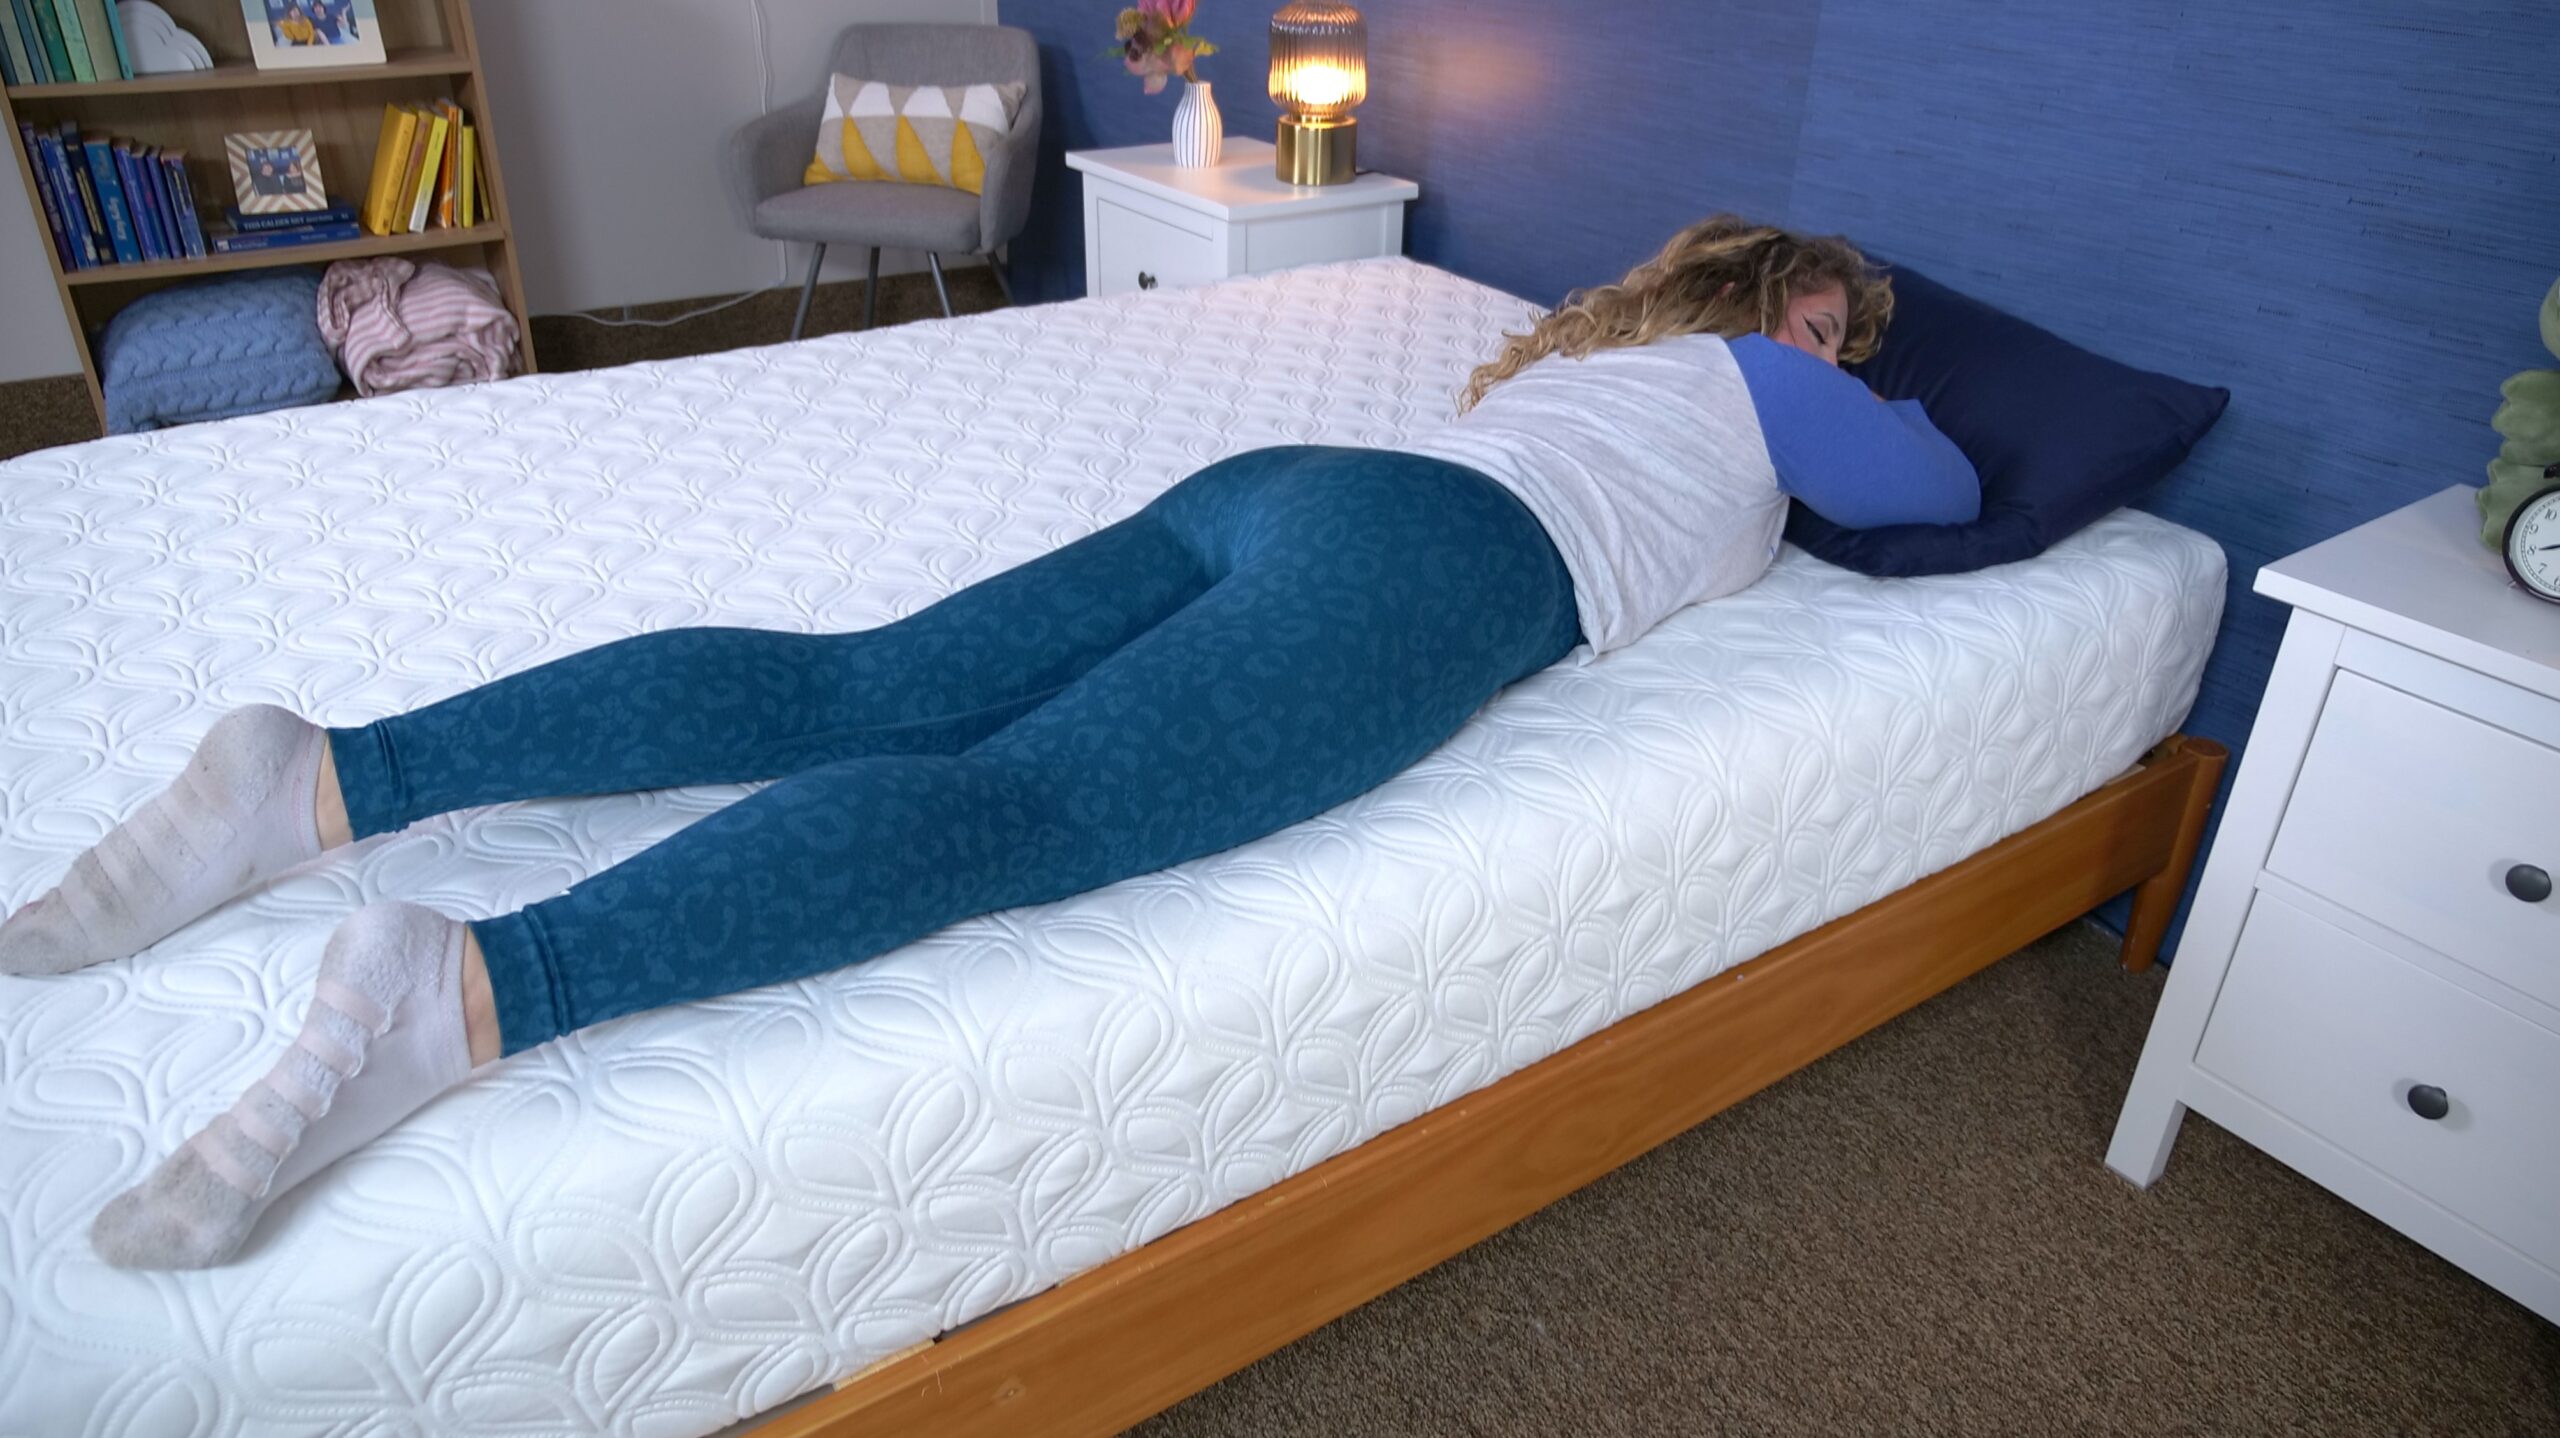 Nichole stomach sleeping on the Cocoon Chill Mattress Construction